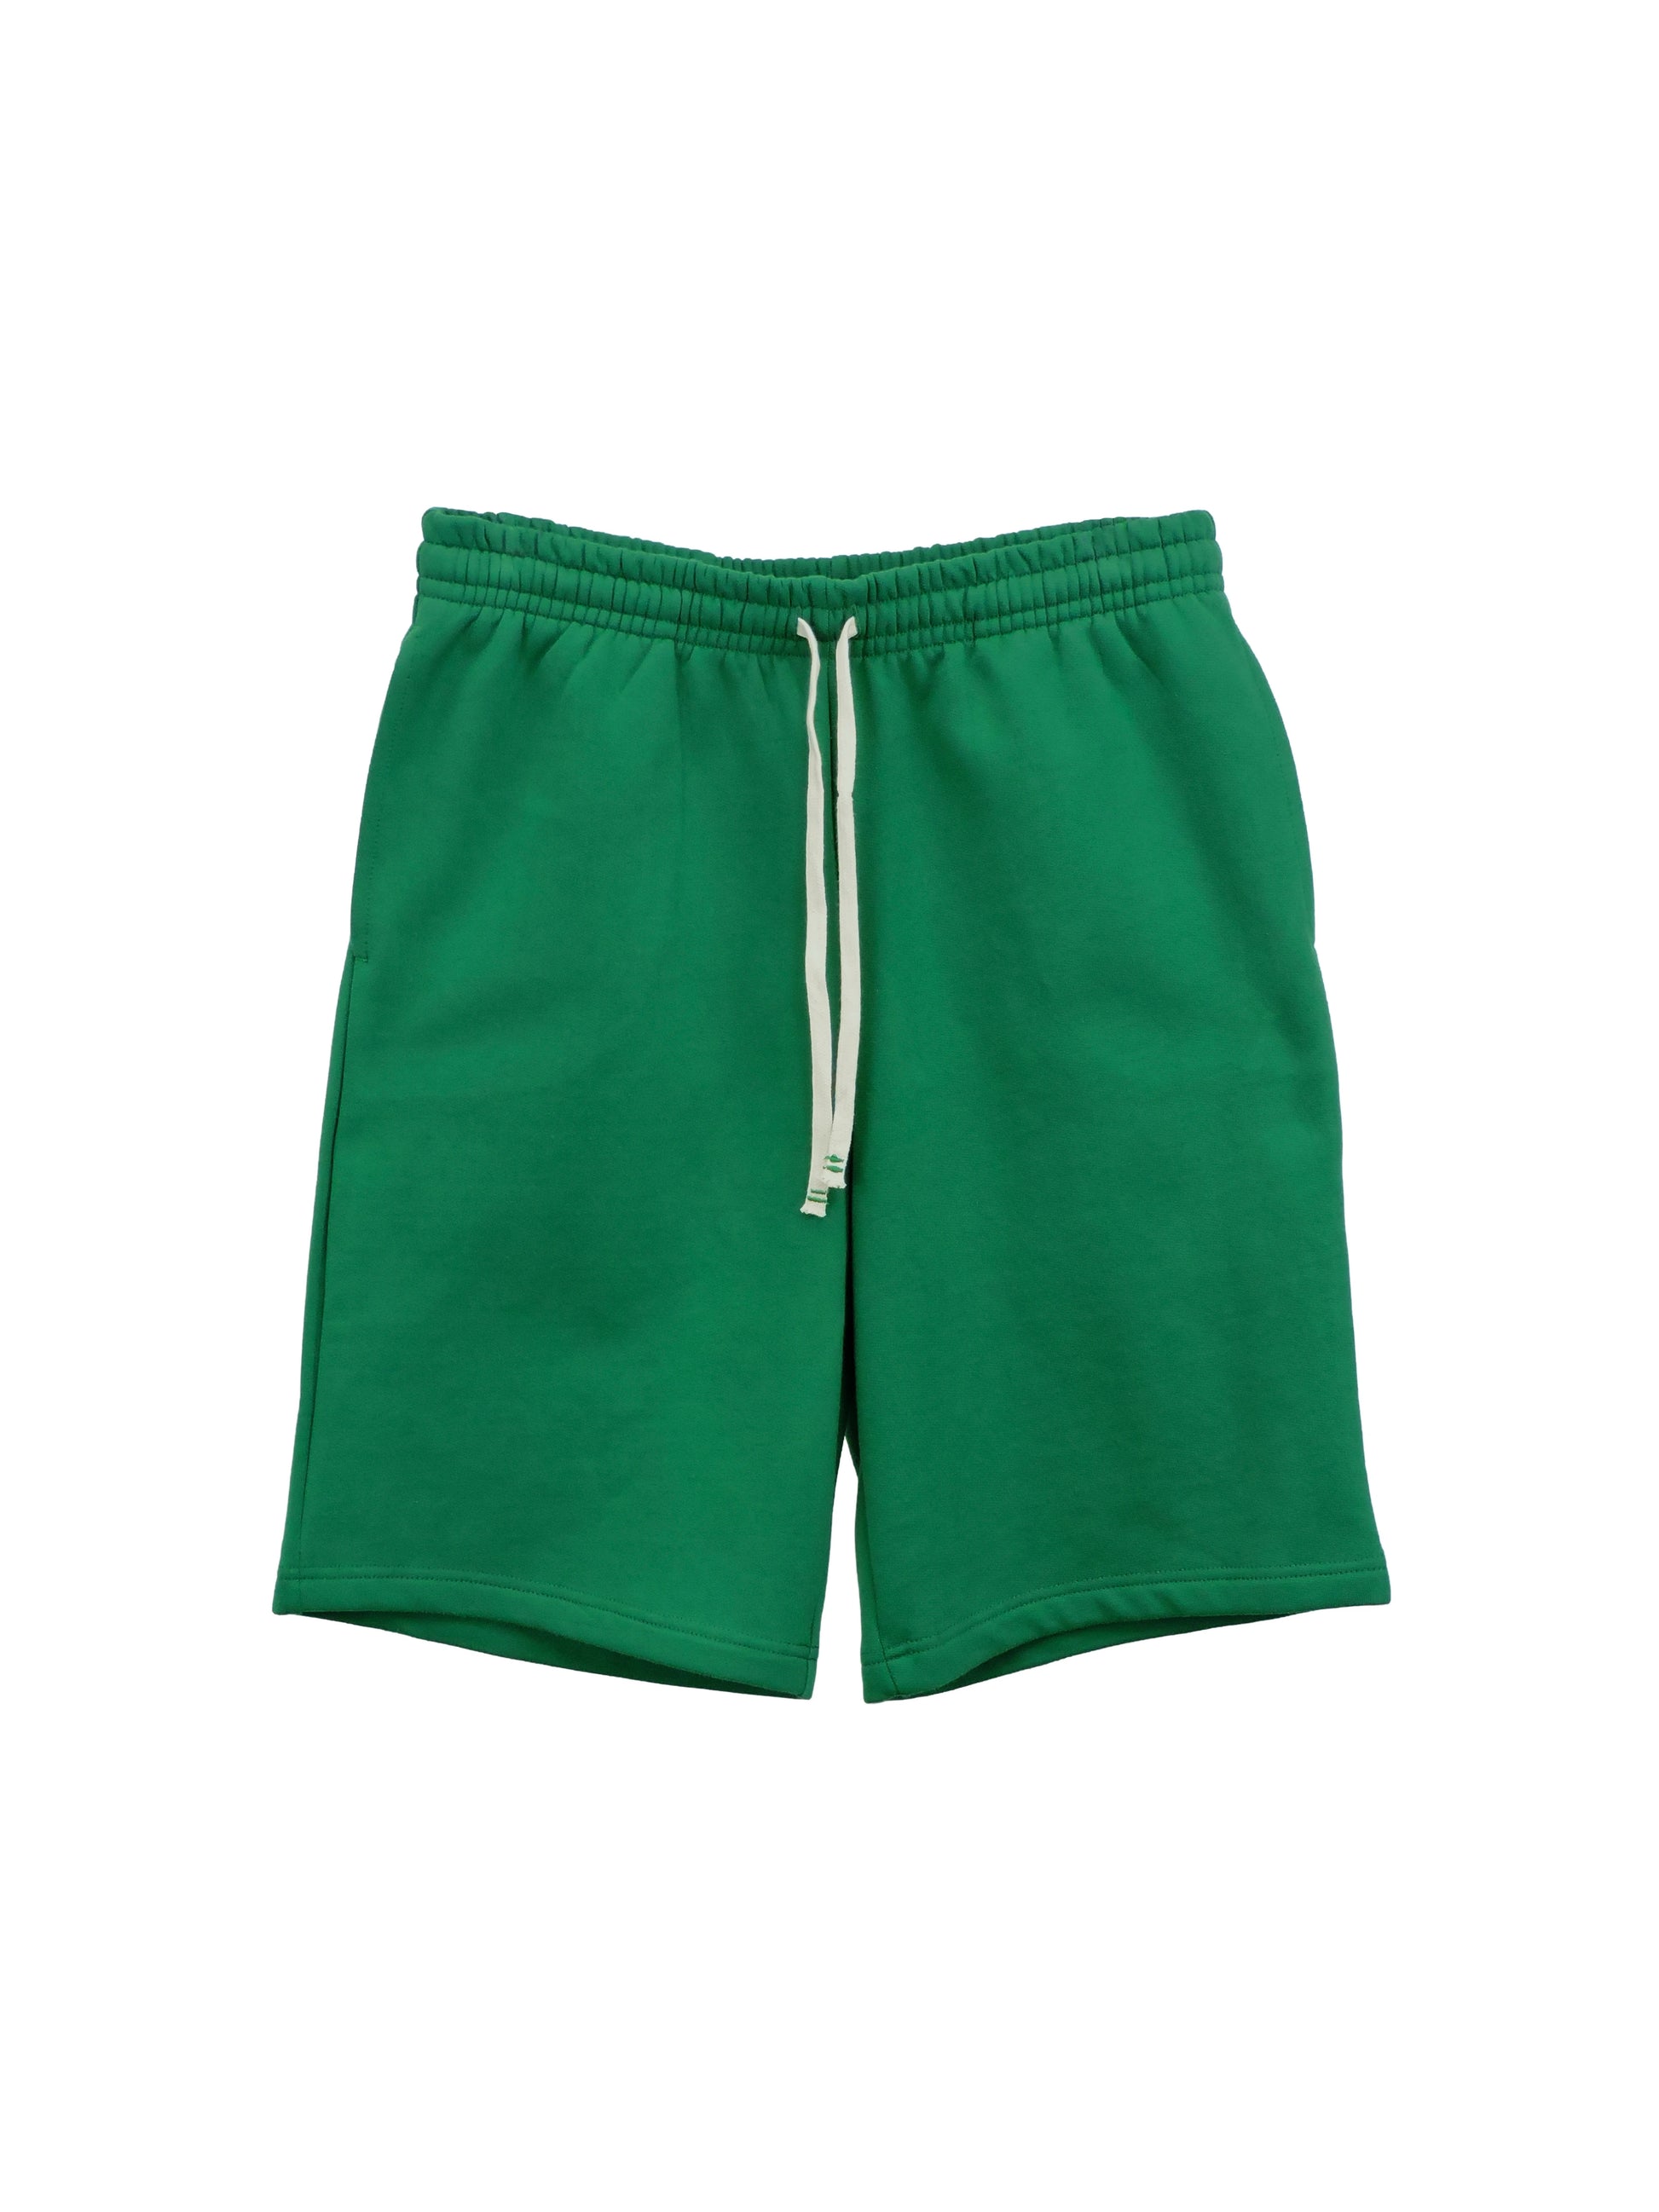 Green Long Shorts Made of Fleece and with White Drawstrings